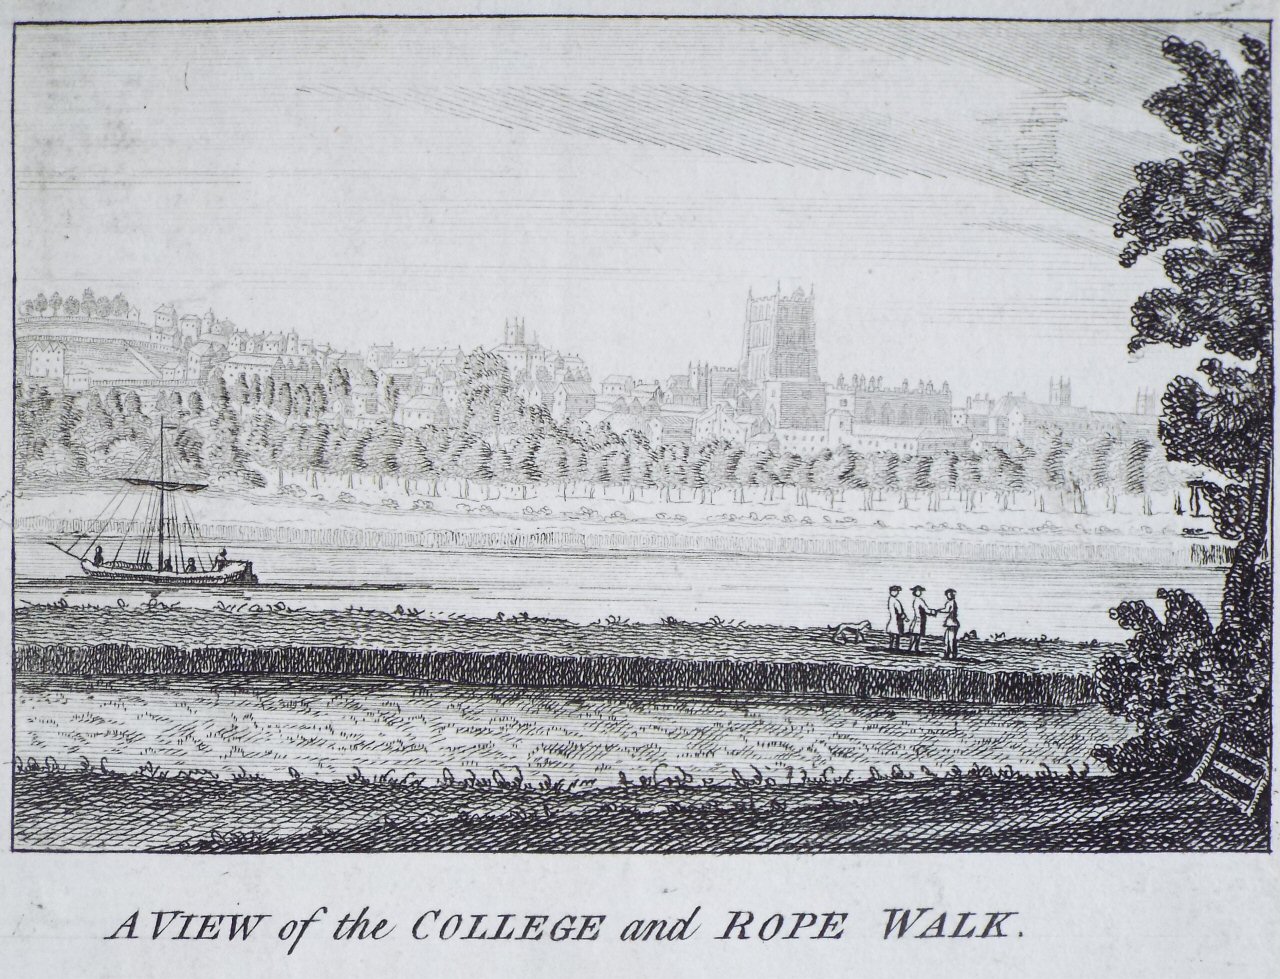 Print - A View of the College and Rope Walk.